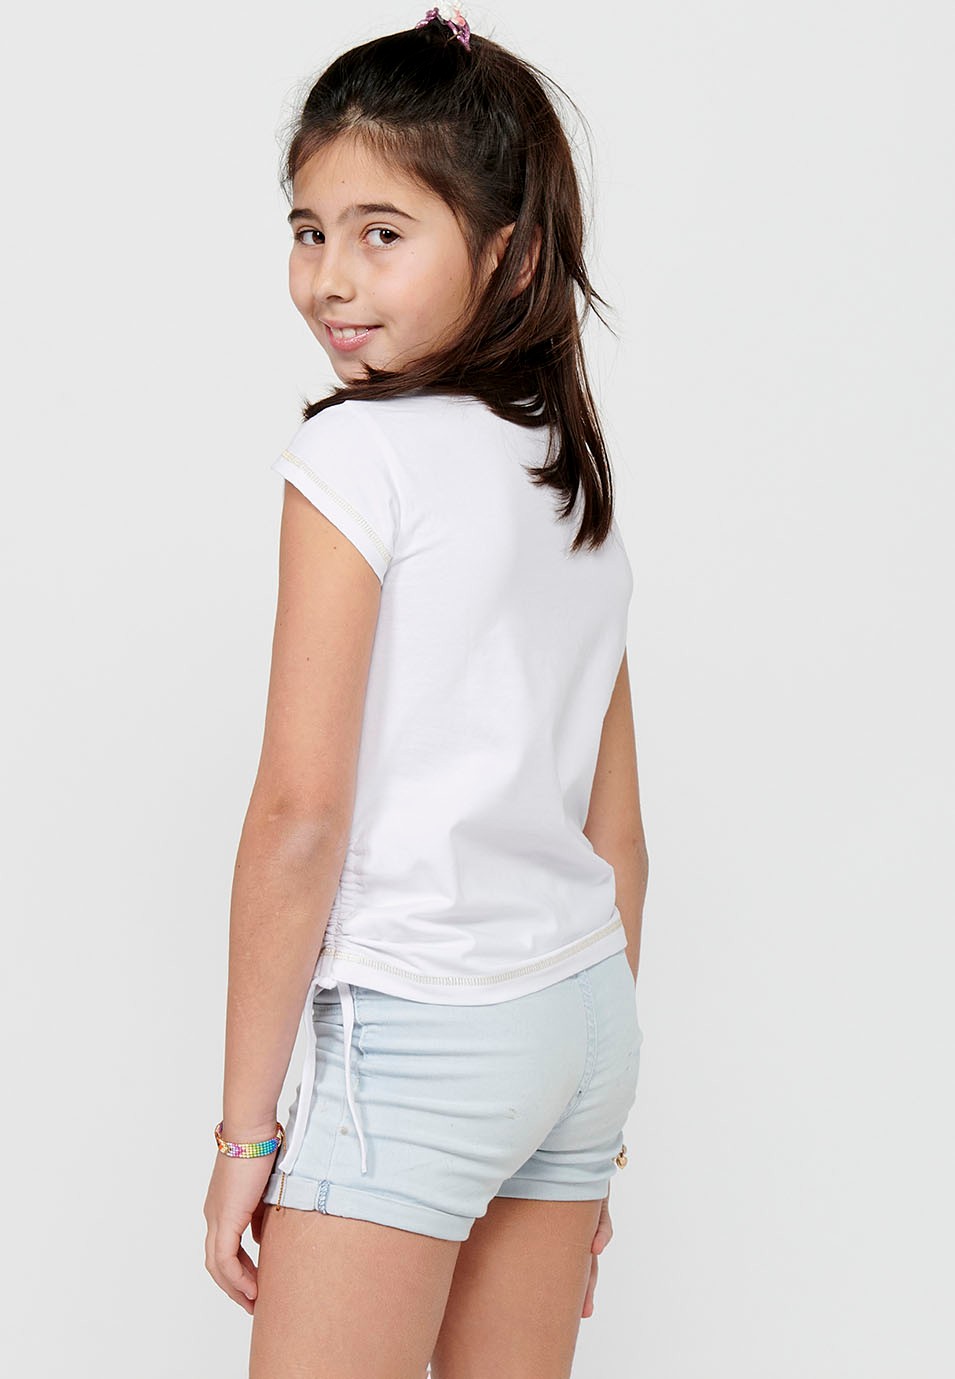 Short-sleeved T-shirt Round Neck Top with Front Print and White Side Details for Girls 7